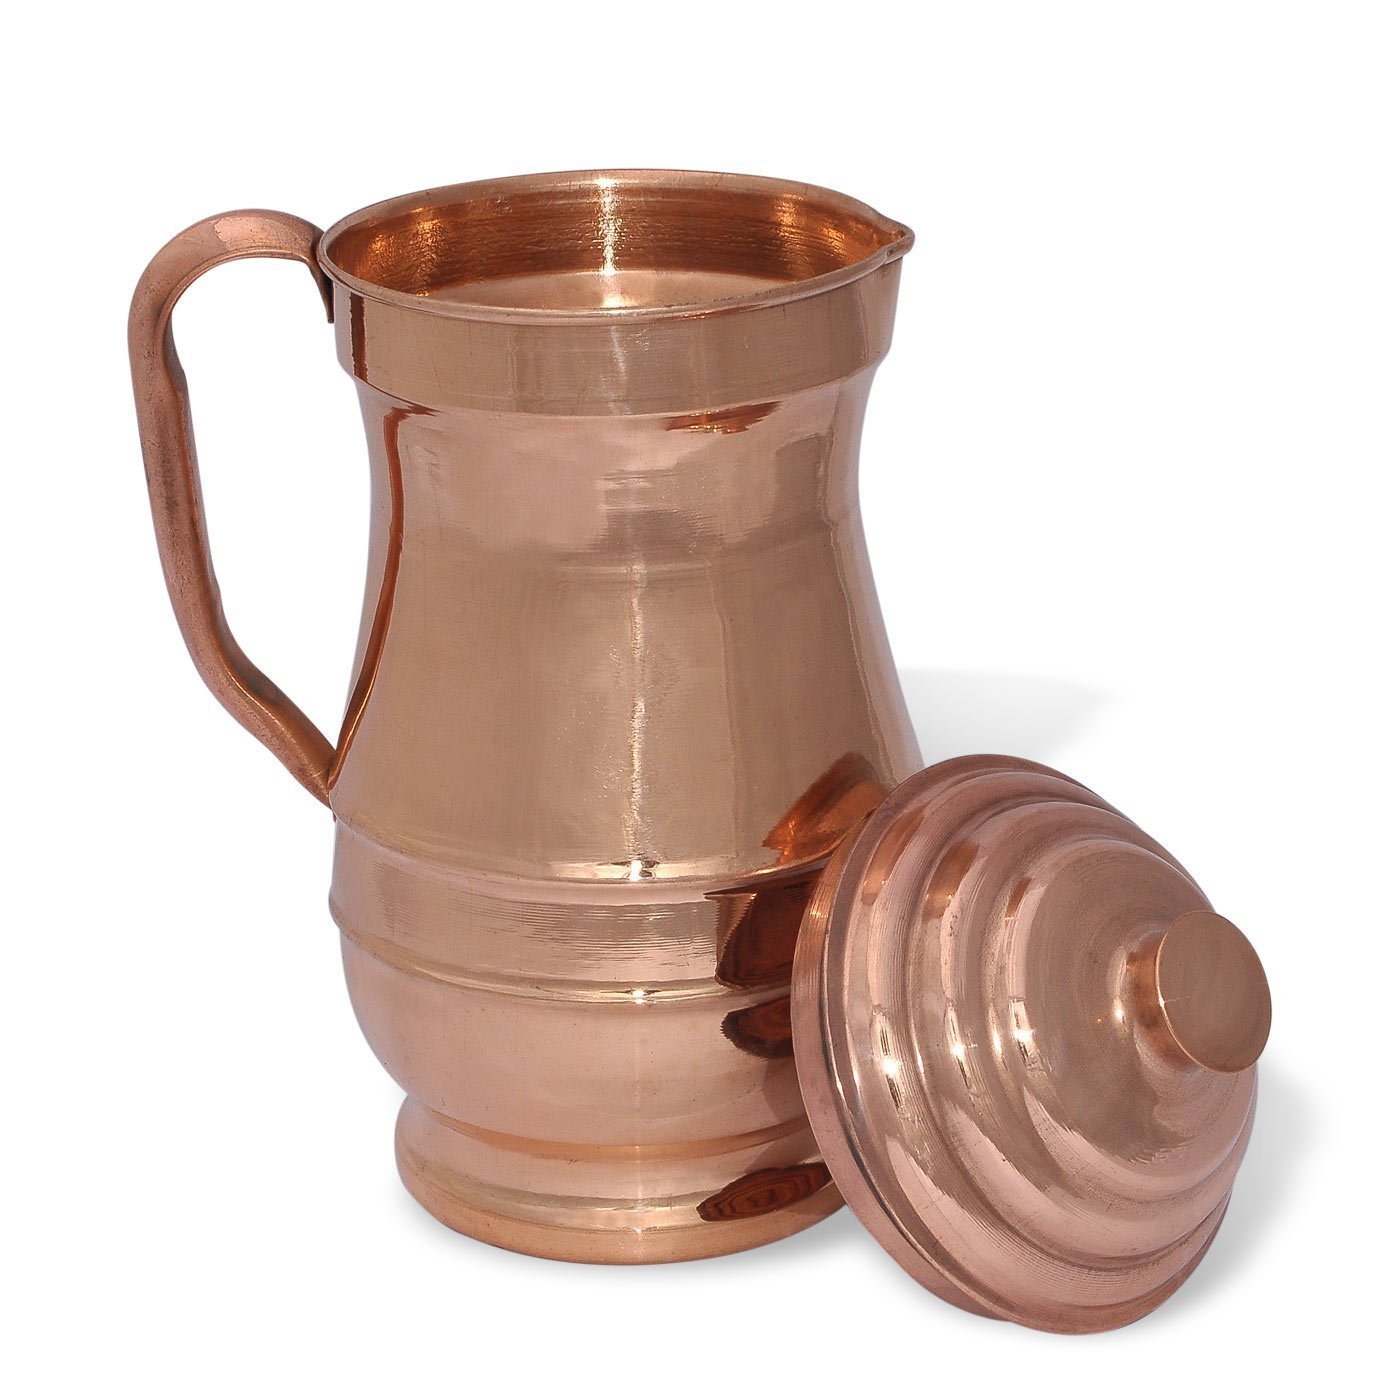 Handcrafted Water Pitcher Smooth Finished Maharaja Jug Copper Pitcher Capacity 60 Fluid Ounce Approx